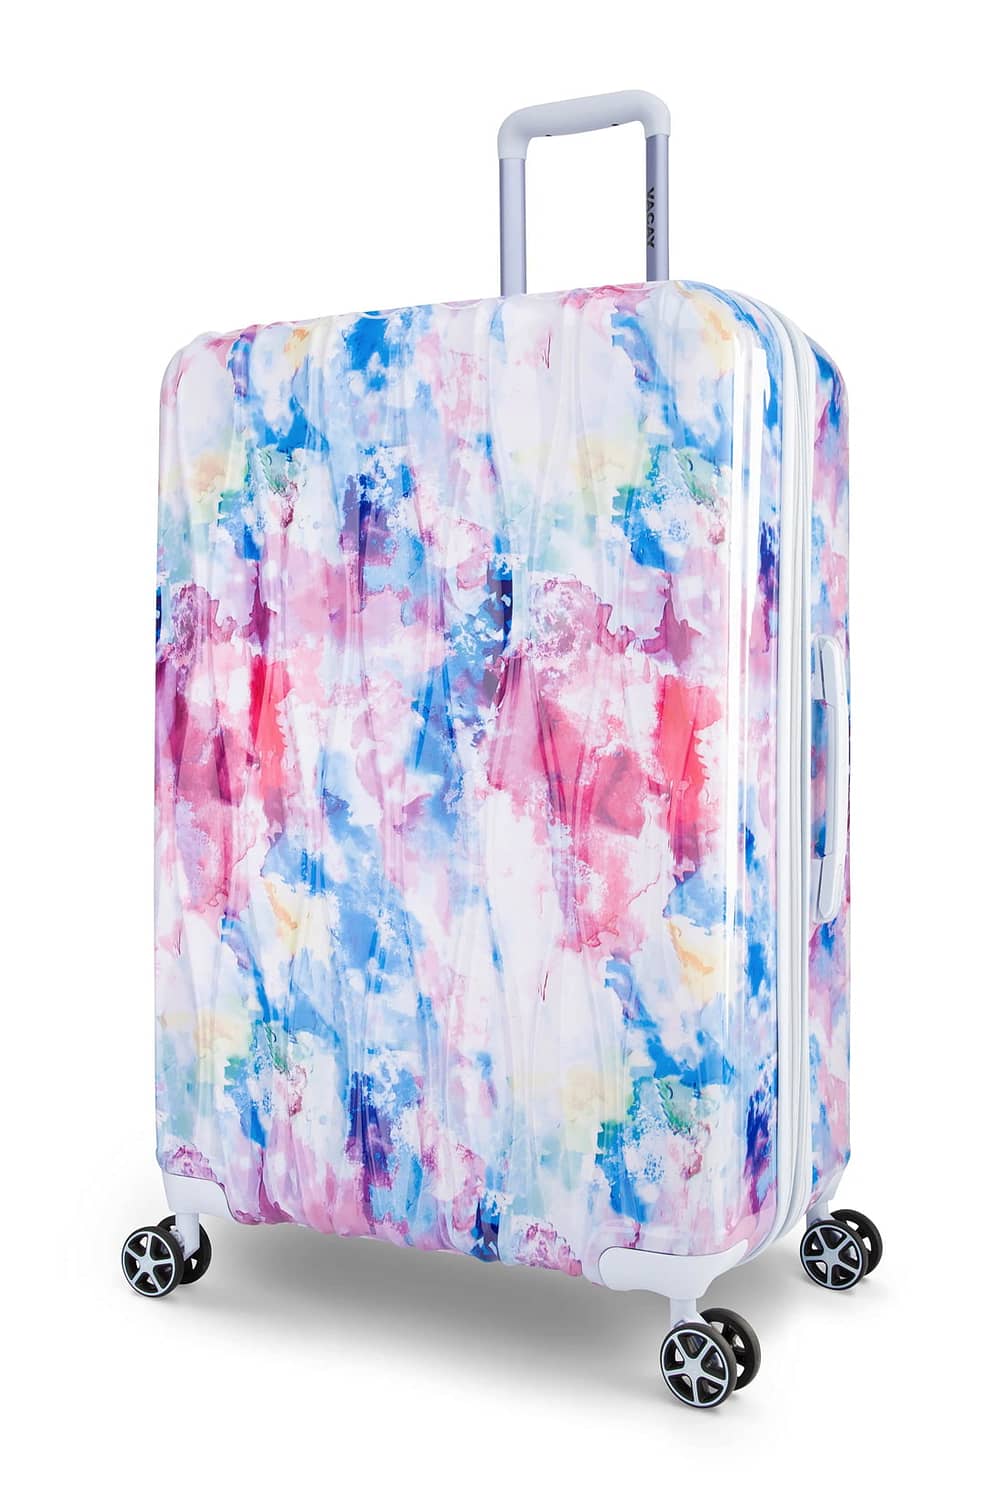 Best luggage deal on Nordstrom